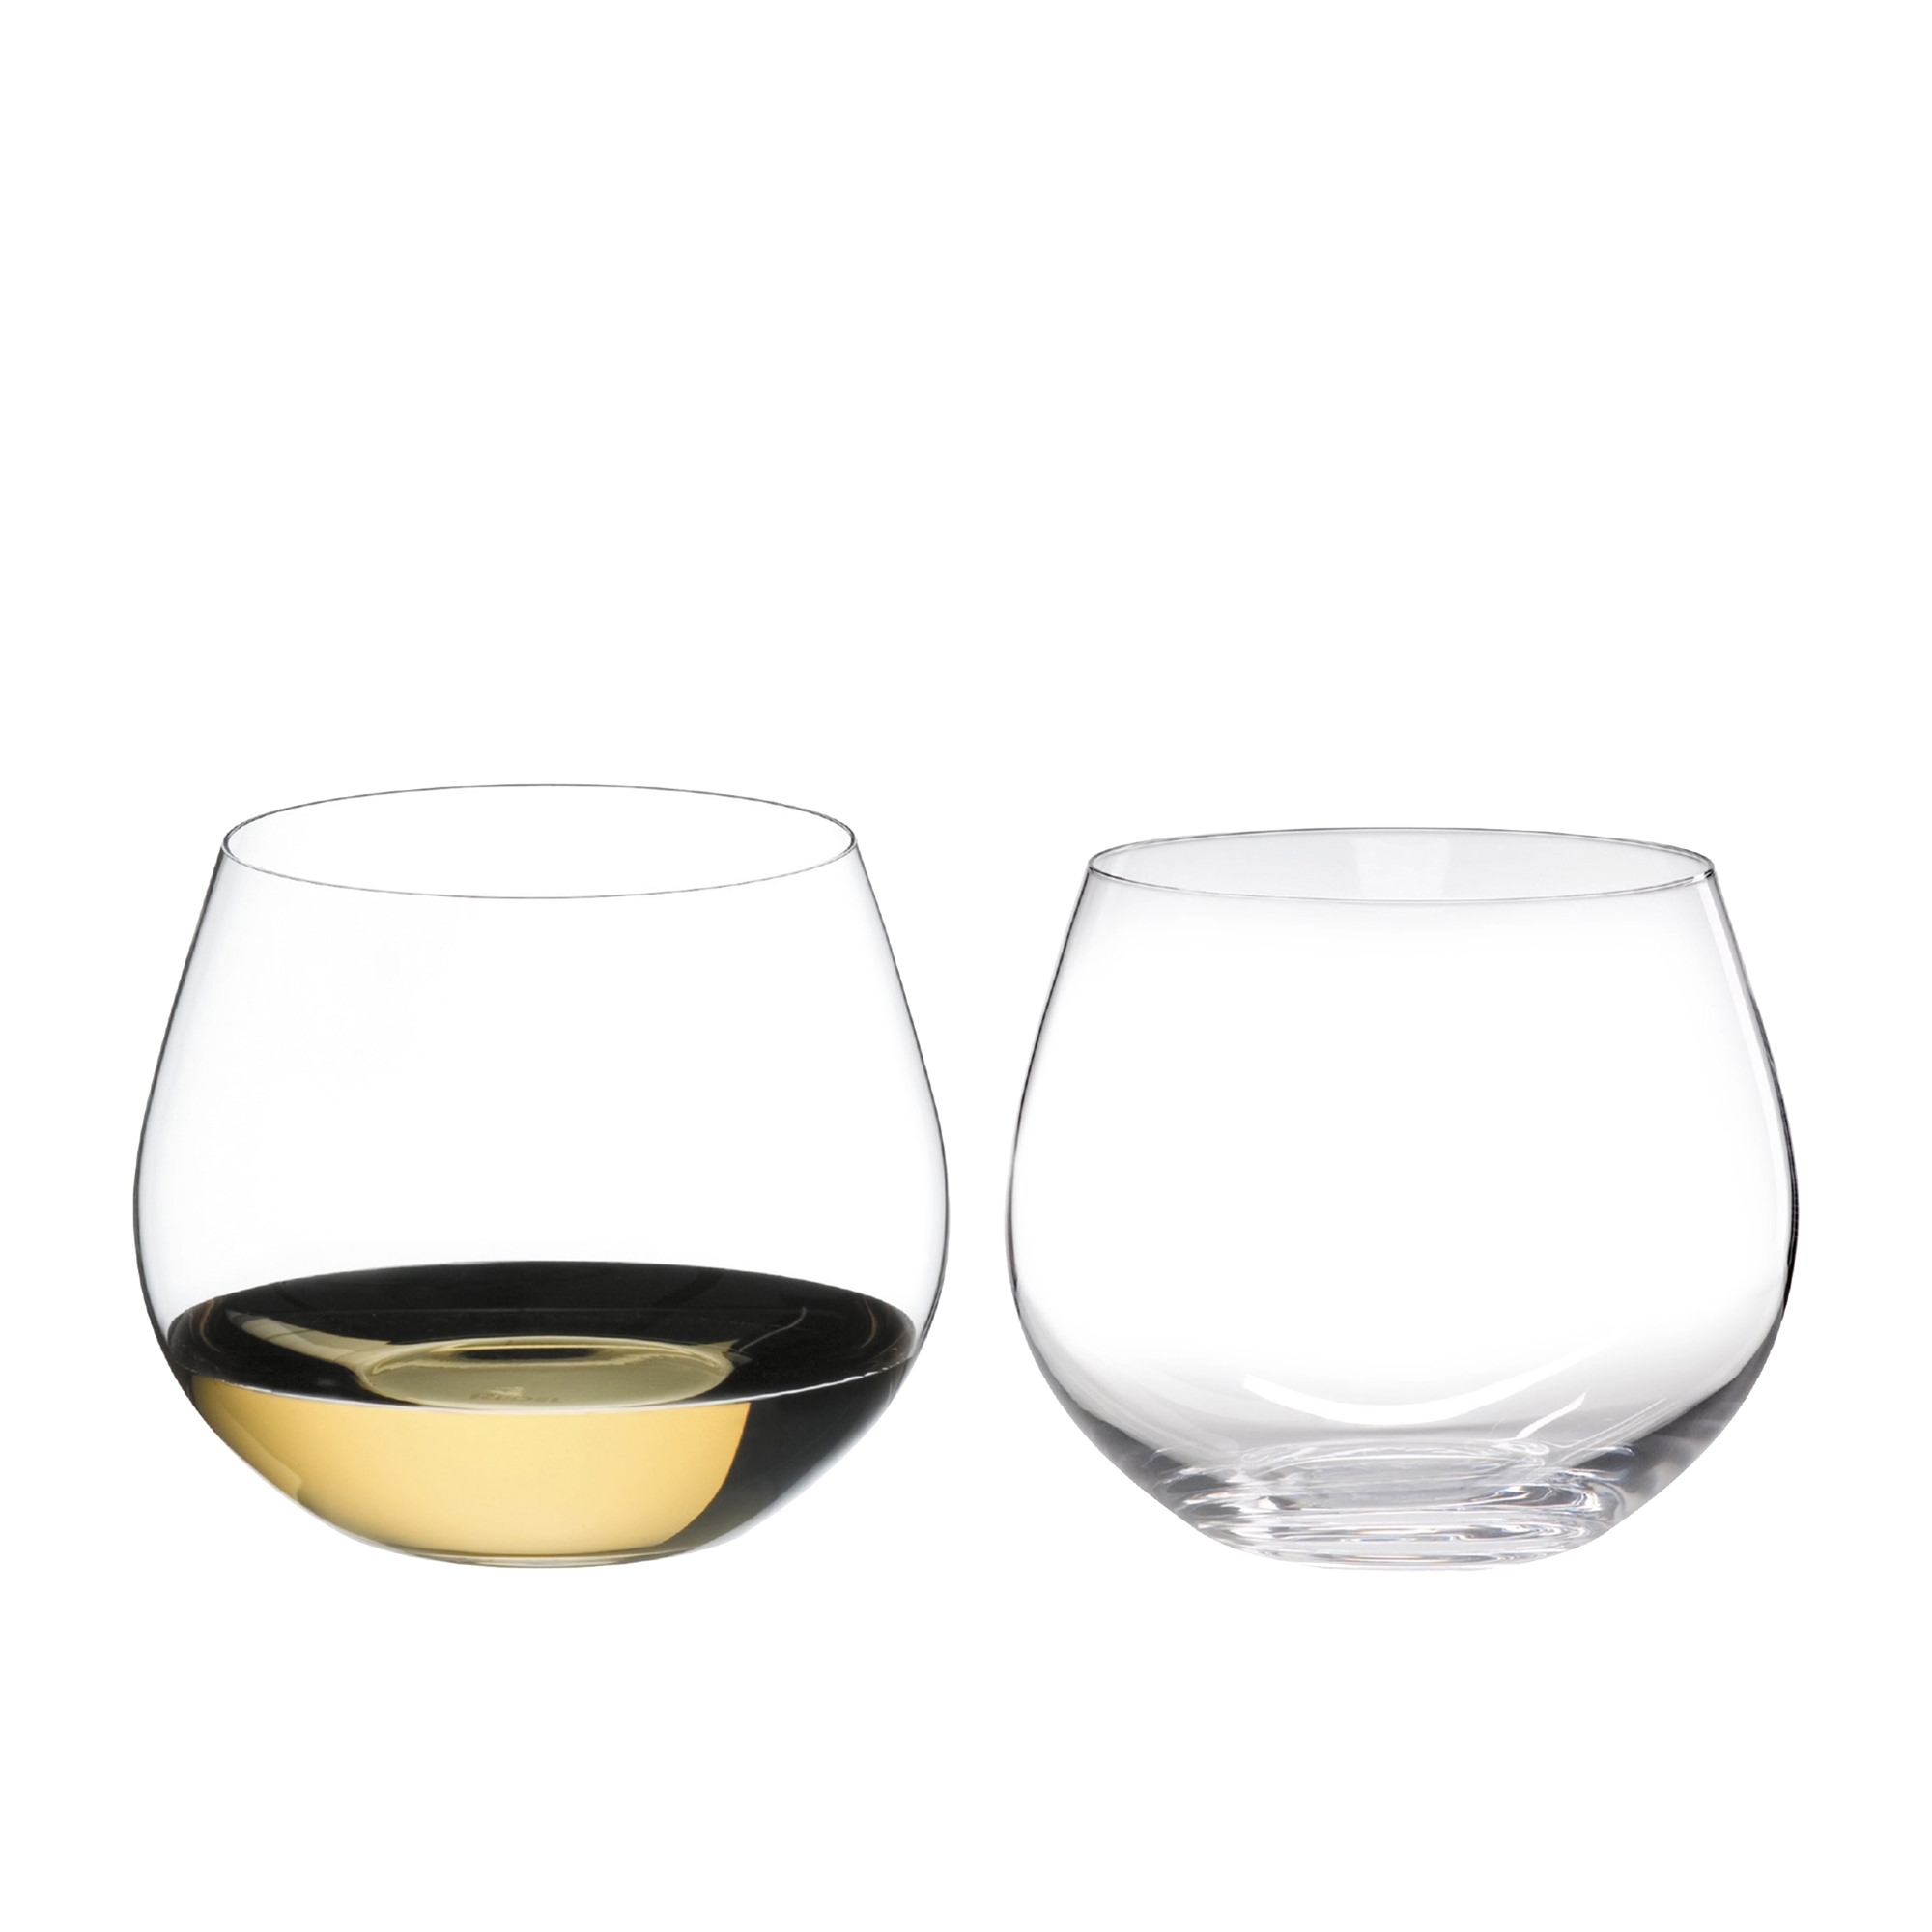 Riedel O Series Oaked Chardonnay Wine Glass 580ml Set of 2 Image 1